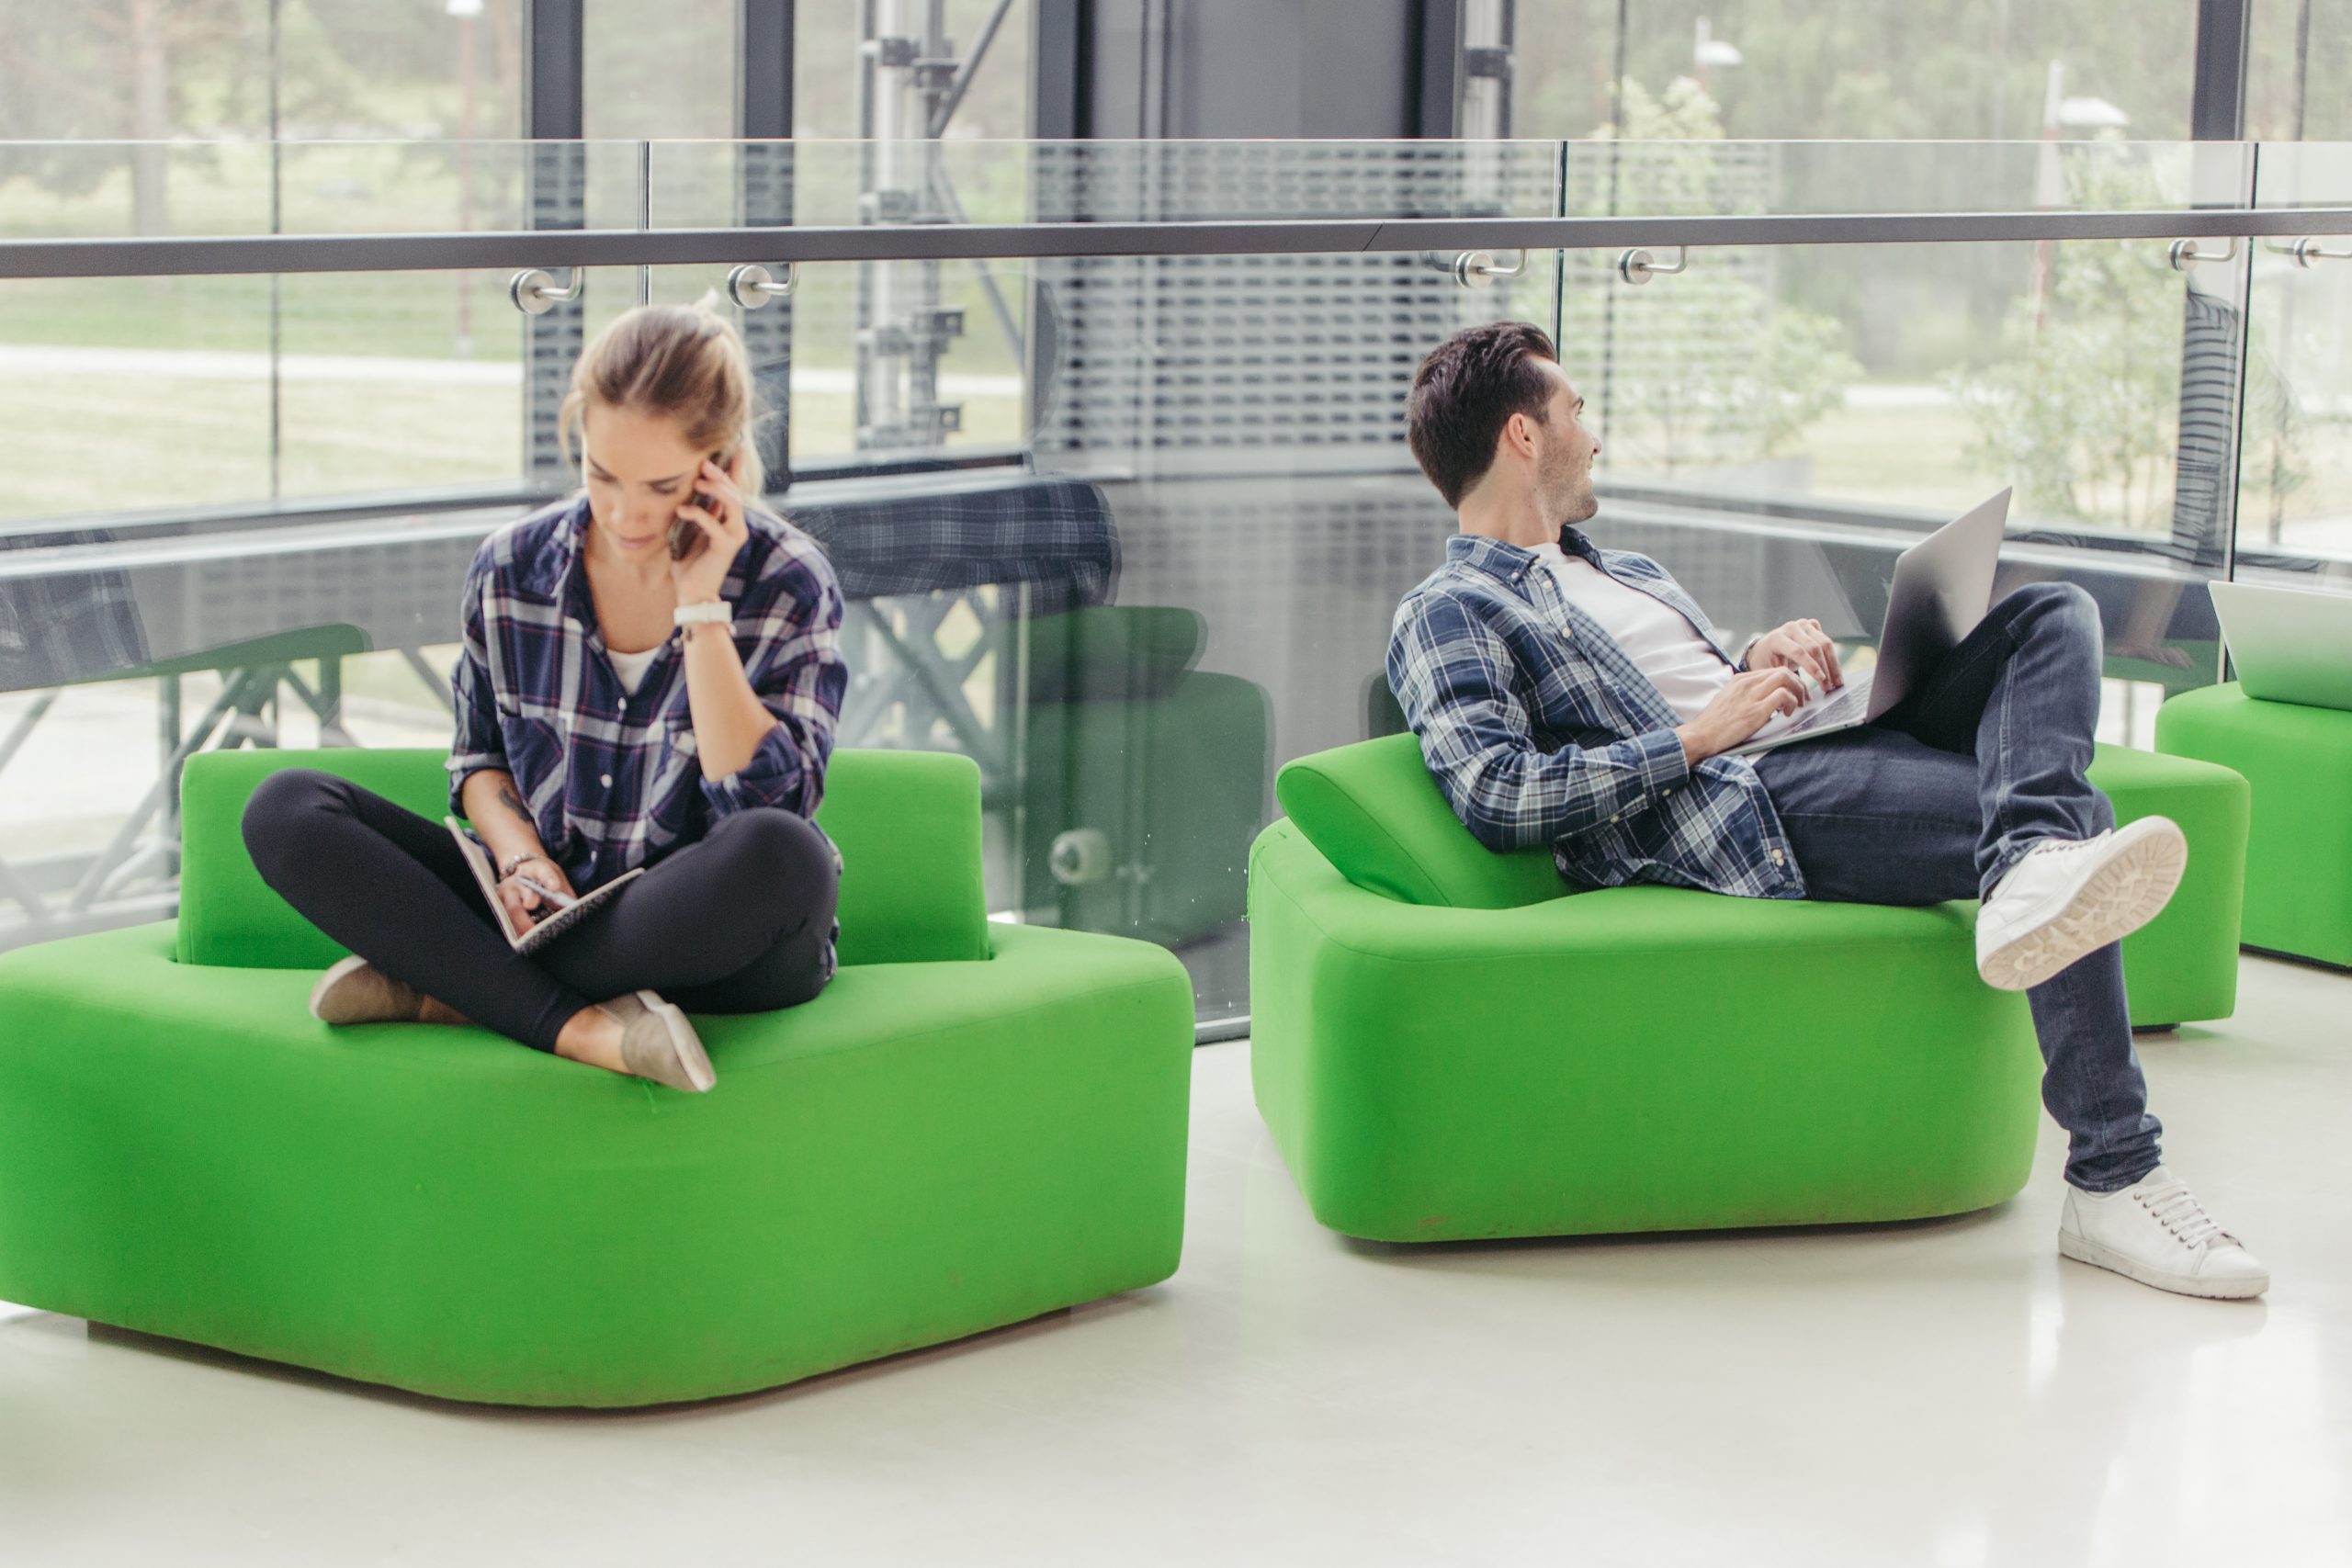 workers in soft seating in an office